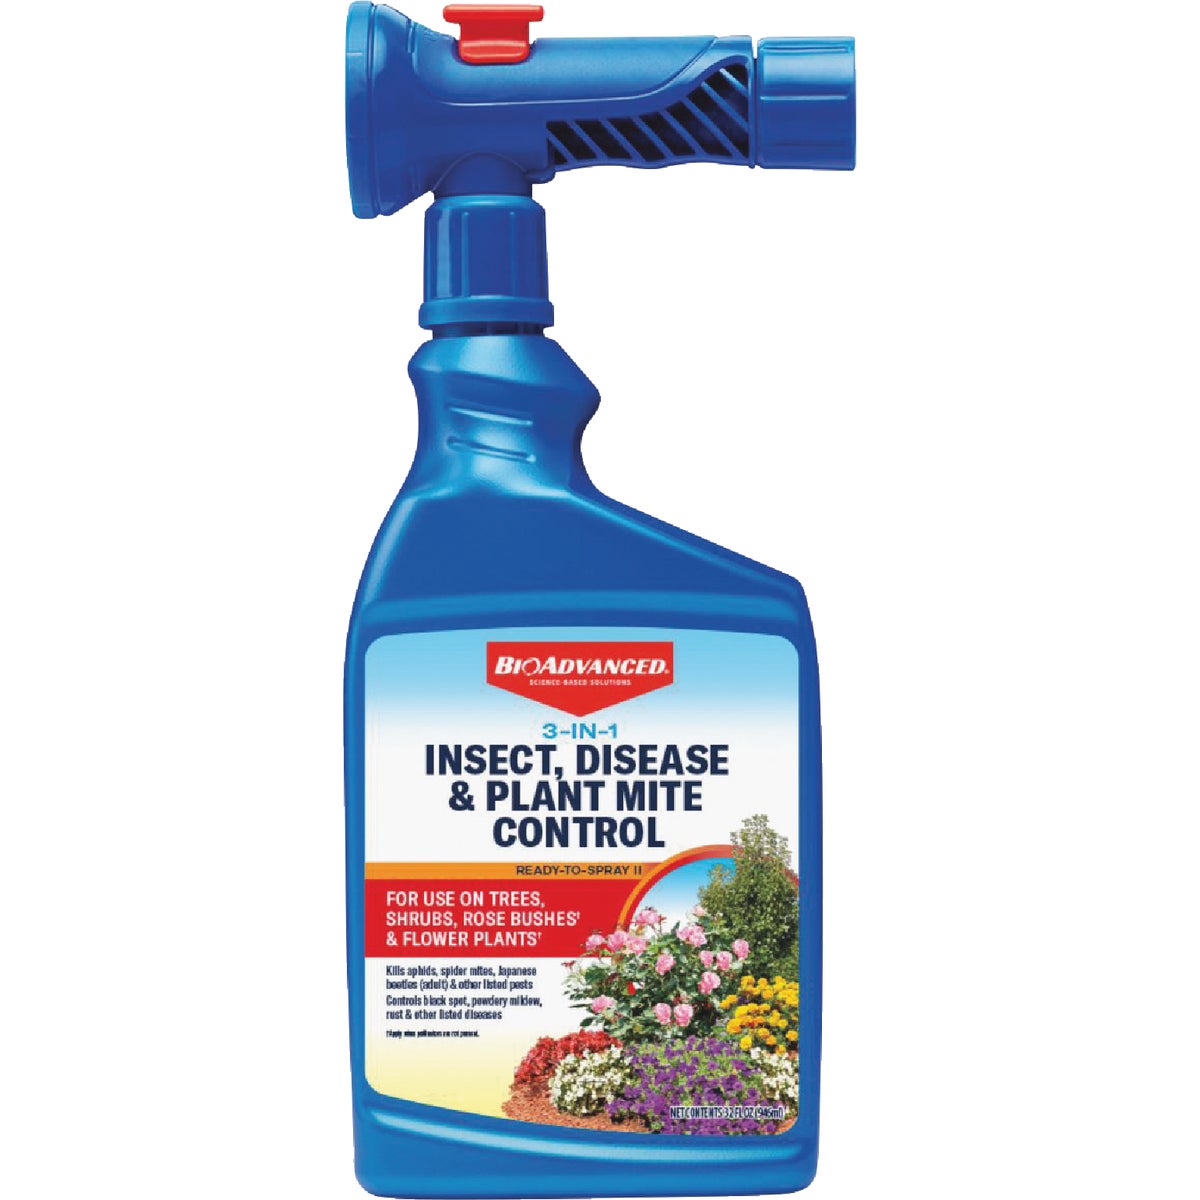 Item 705410, Insect, disease, and mite control.